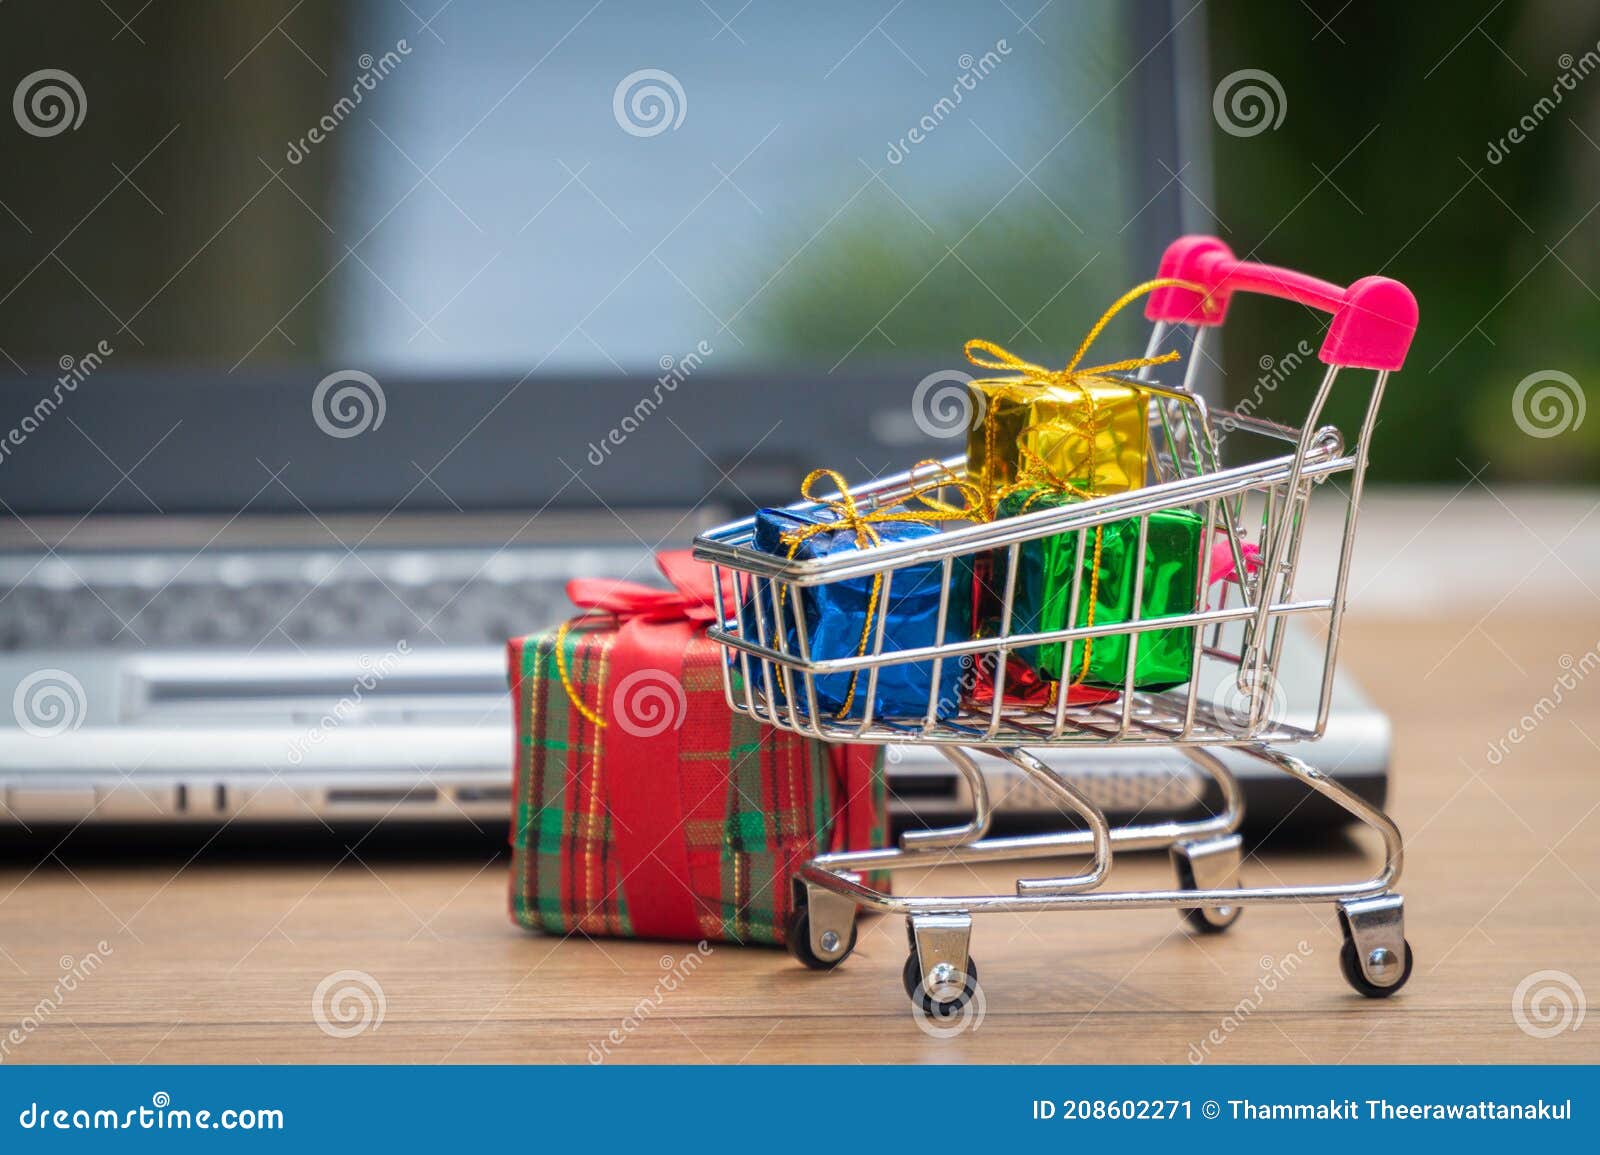 shopping online deas about e-commerce is a transaction of buying or selling